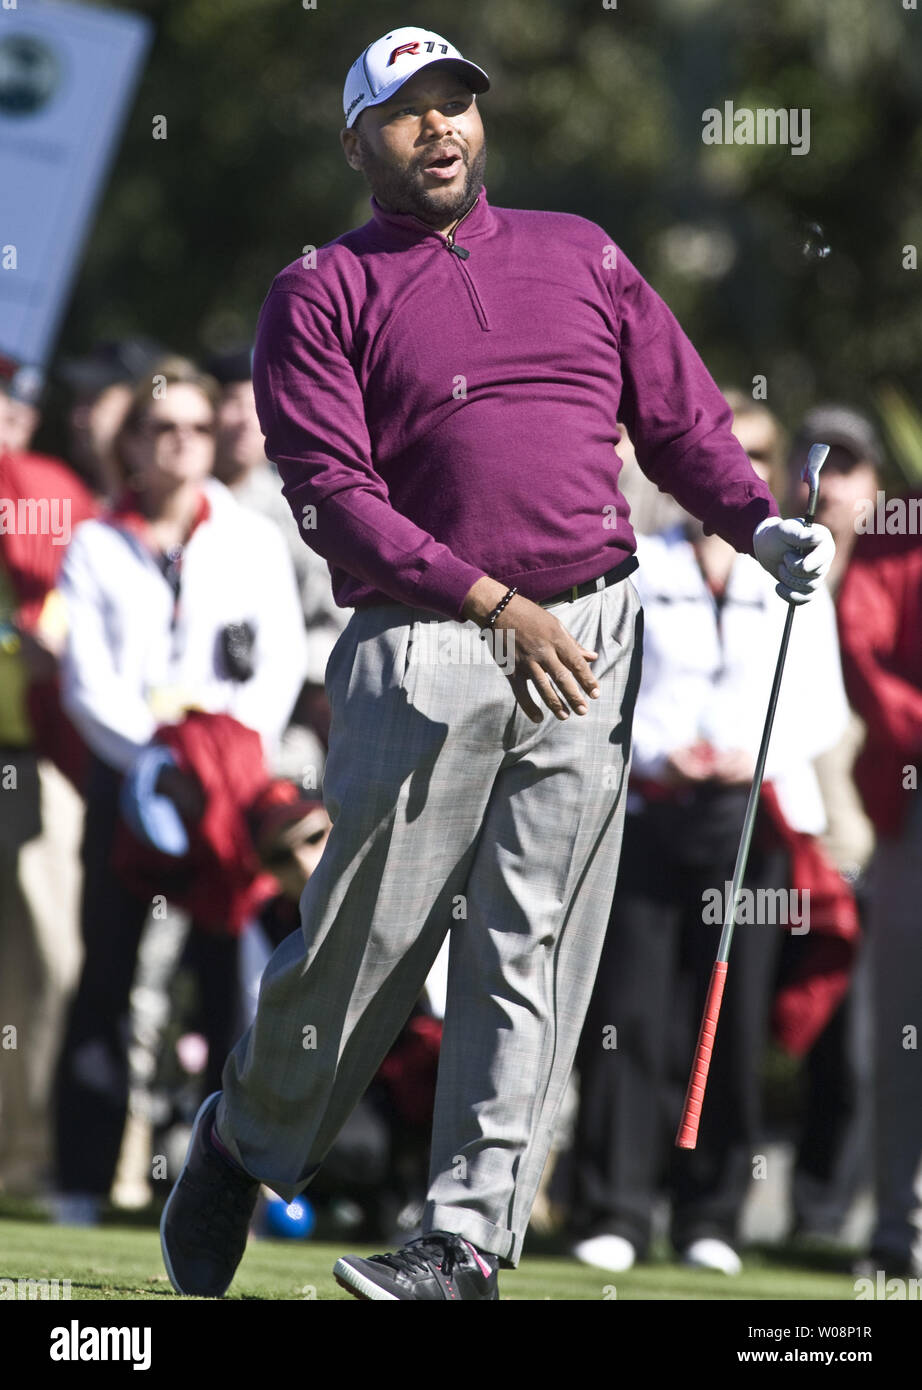 Actor Anthony Anderson watches his tee shot on the 17th hole at the 3M Celebrity Challenge, a prelude to the AT&T Pebble Beach National Pro-Am at Pebble Beach, California on February 9, 2011.   UPI/Terry Schmitt Stock Photo